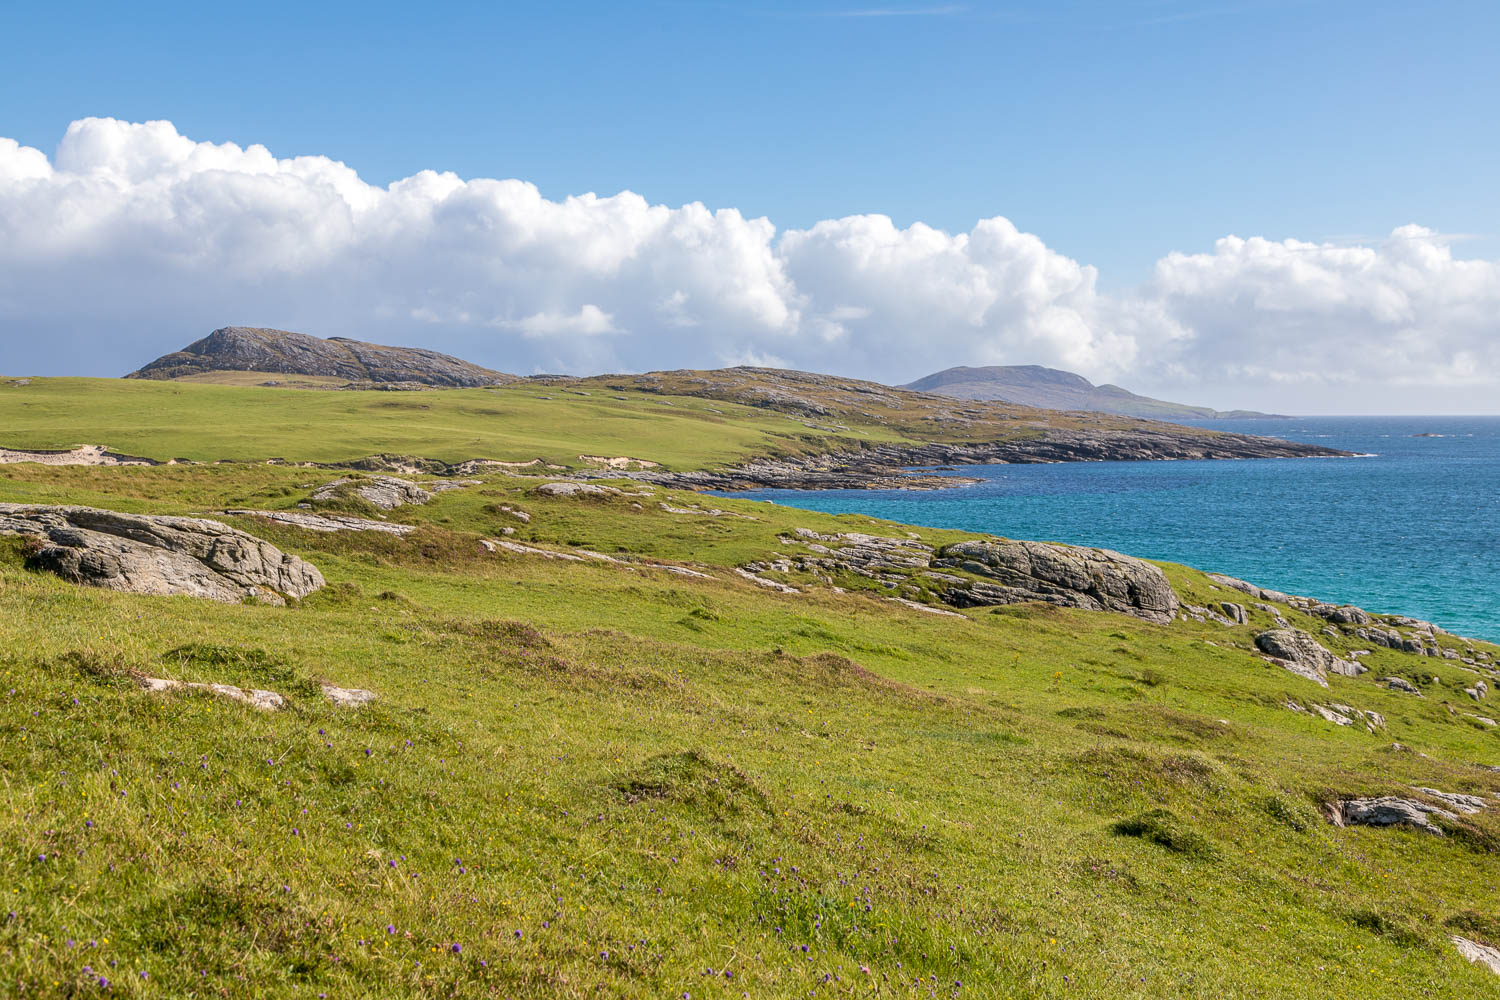 Vatersay, Bagh a Deas